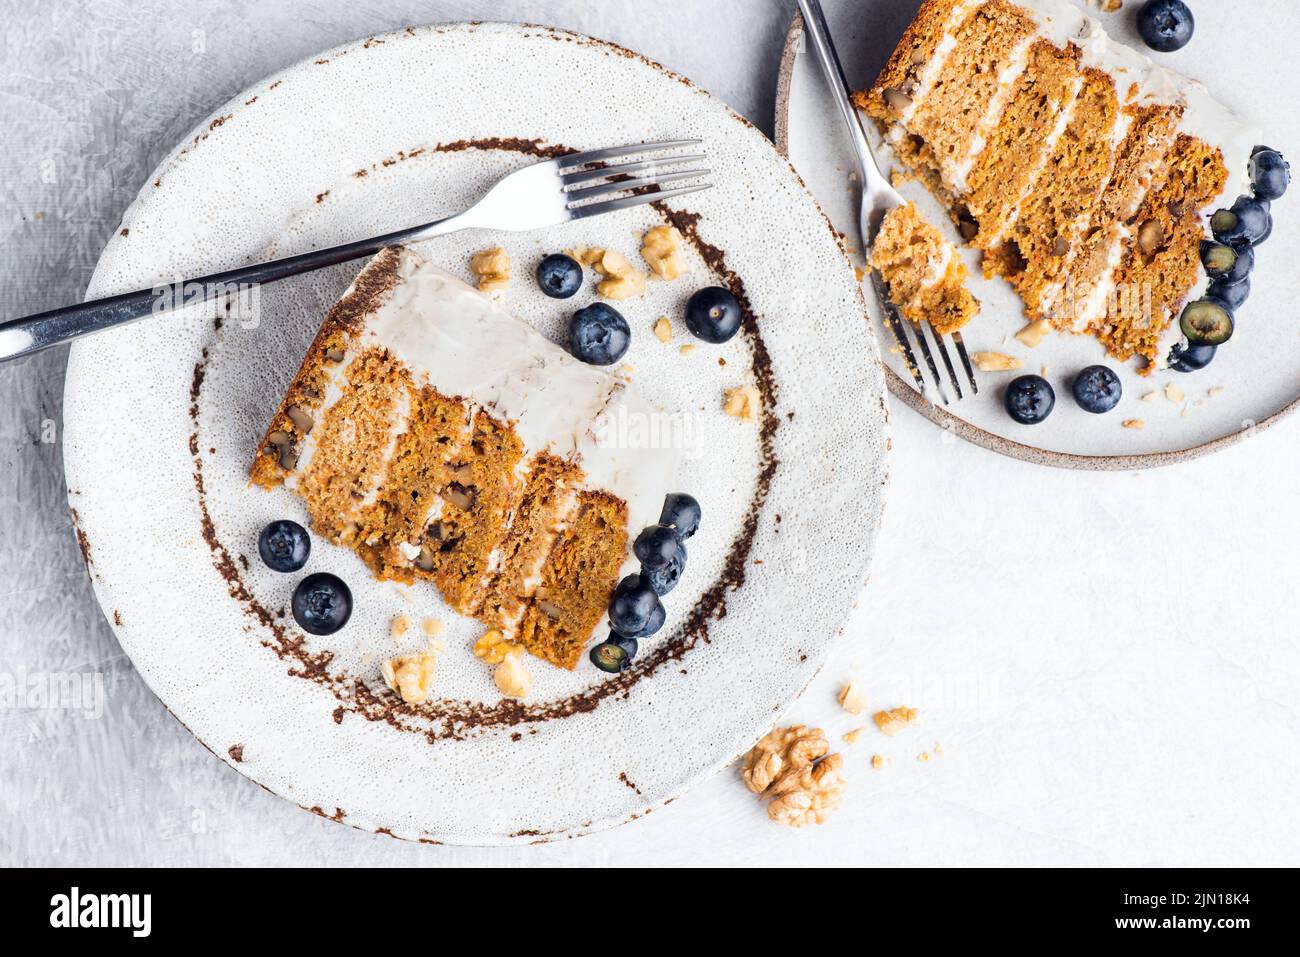 Carrot cake slice with blueberries, top view Stock Photo